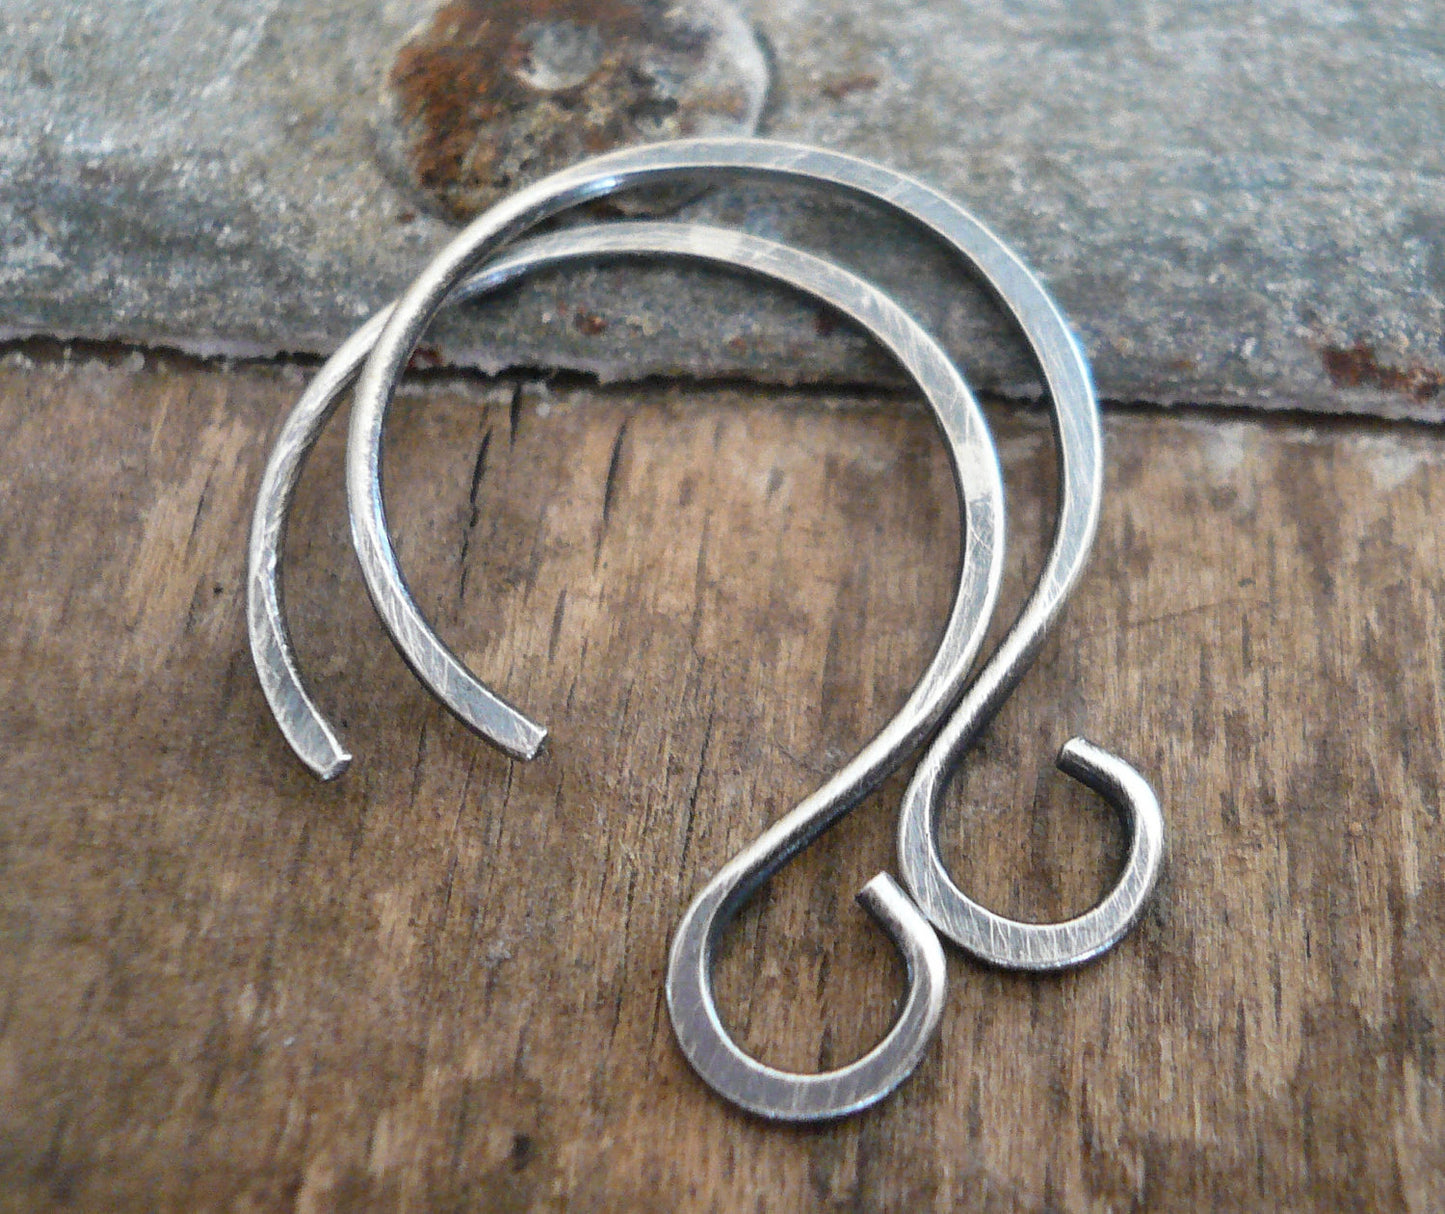 12 Pairs of my Large Solitude Sterling Silver Earwires - Handmade. Handforged. Oxidized and polished